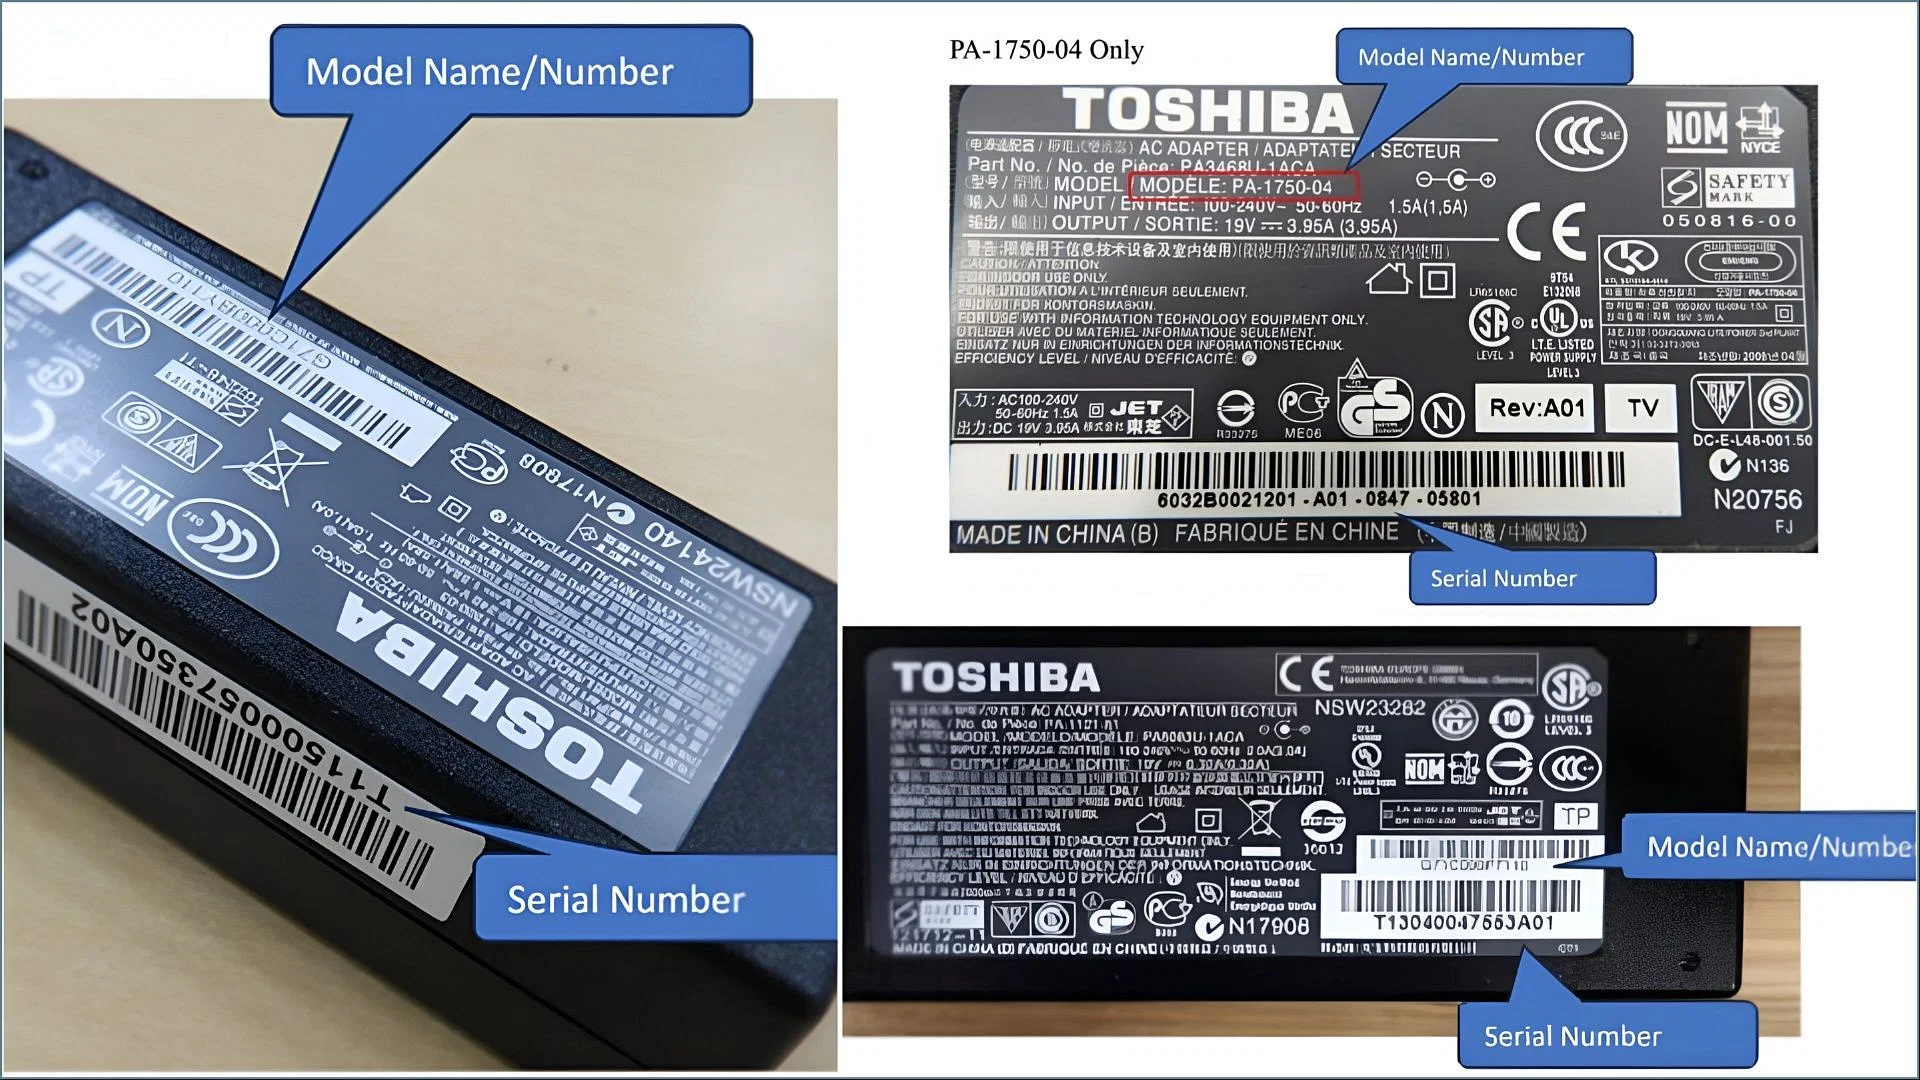 Massive Toshiba Laptop Charger Recall: What You Need to Know About the Fire Risk